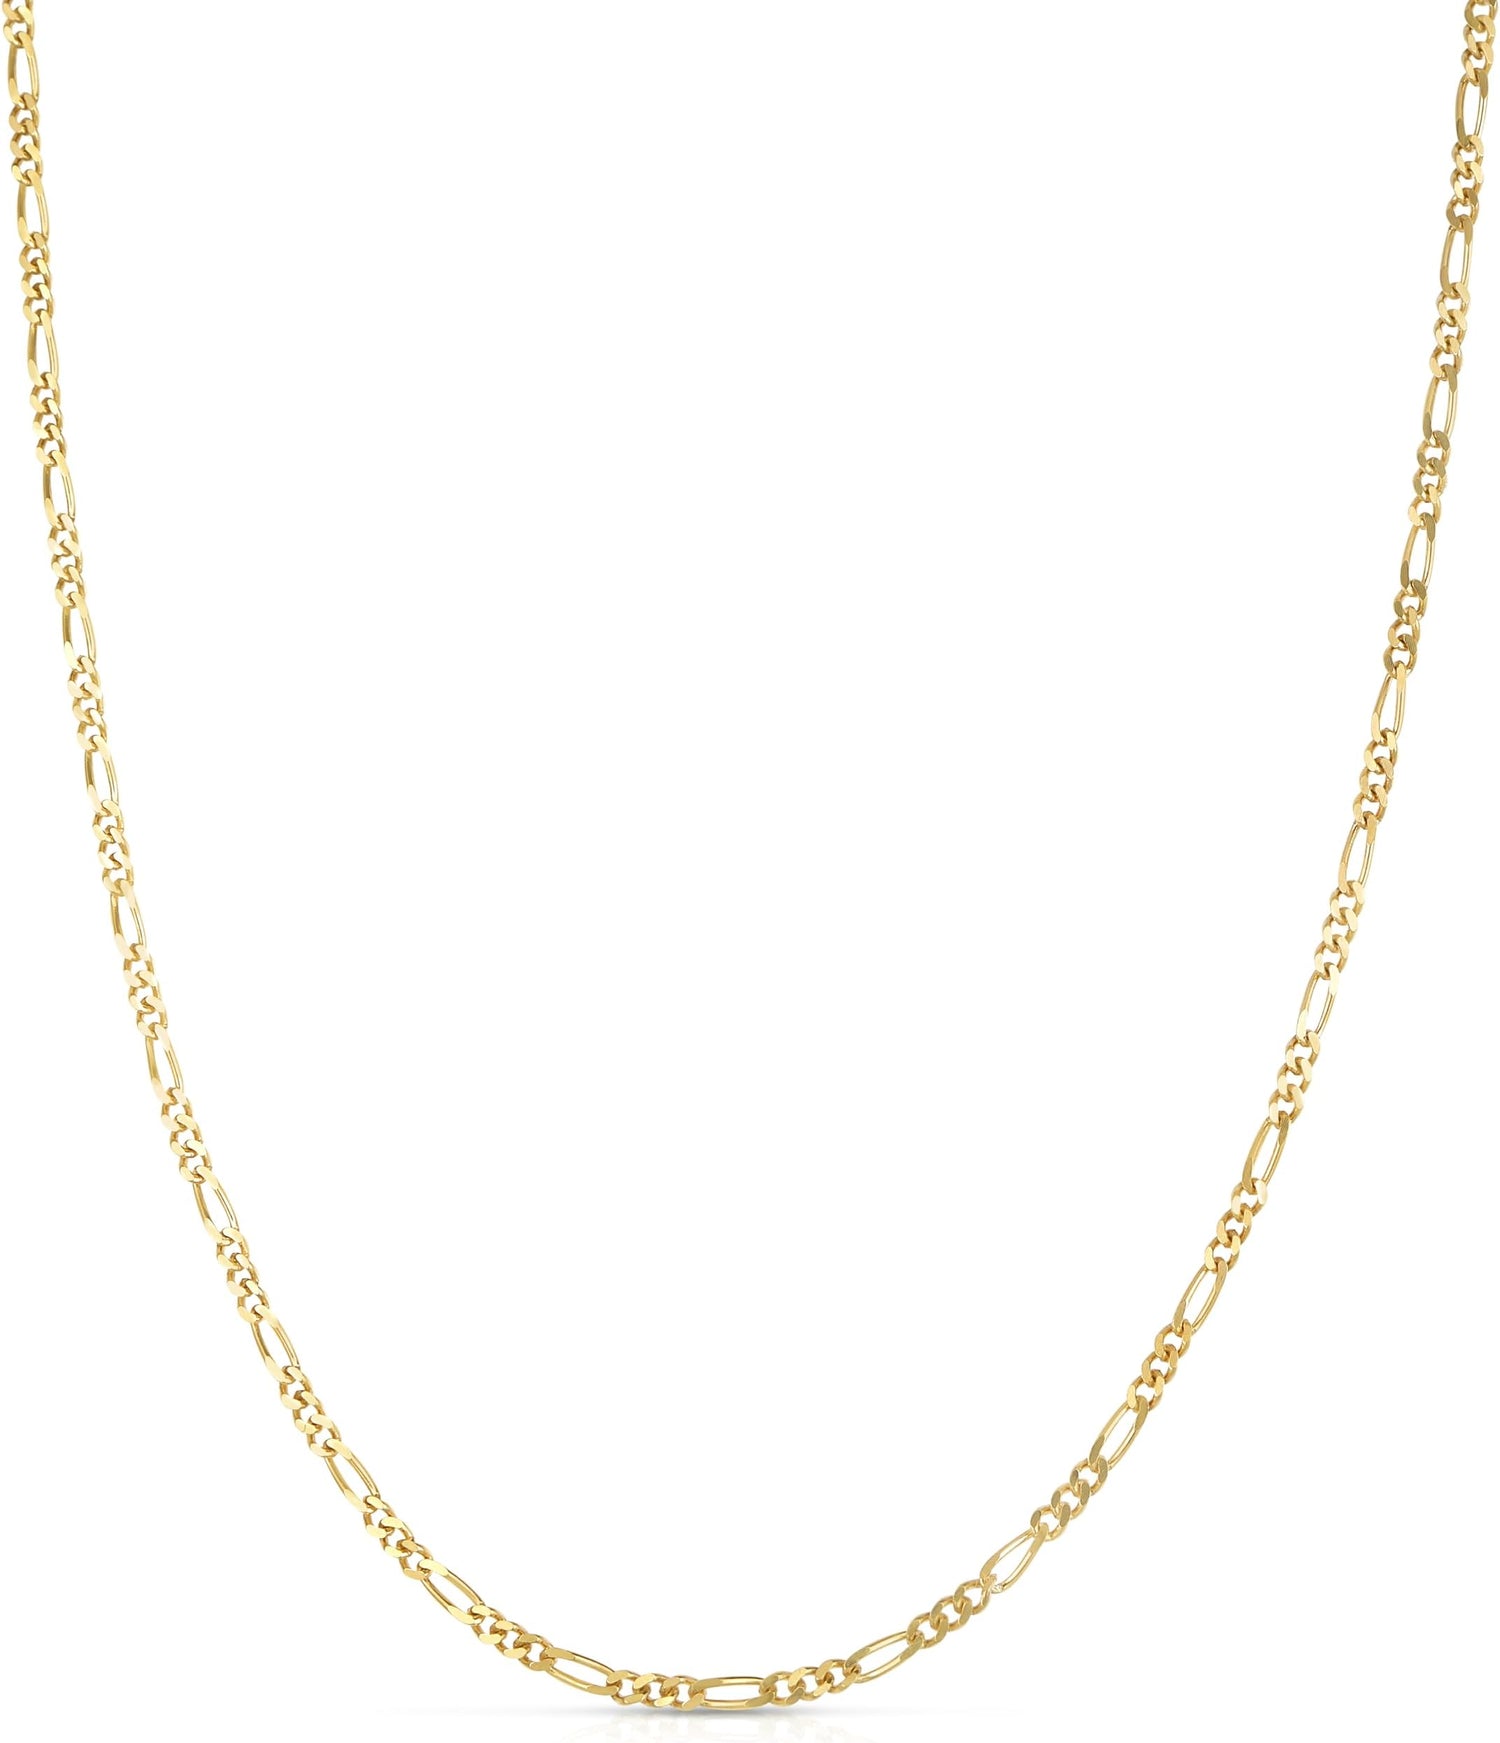 10k Yellow Gold 1.5mm Solid Figaro Chain Link Necklace - 16 inch